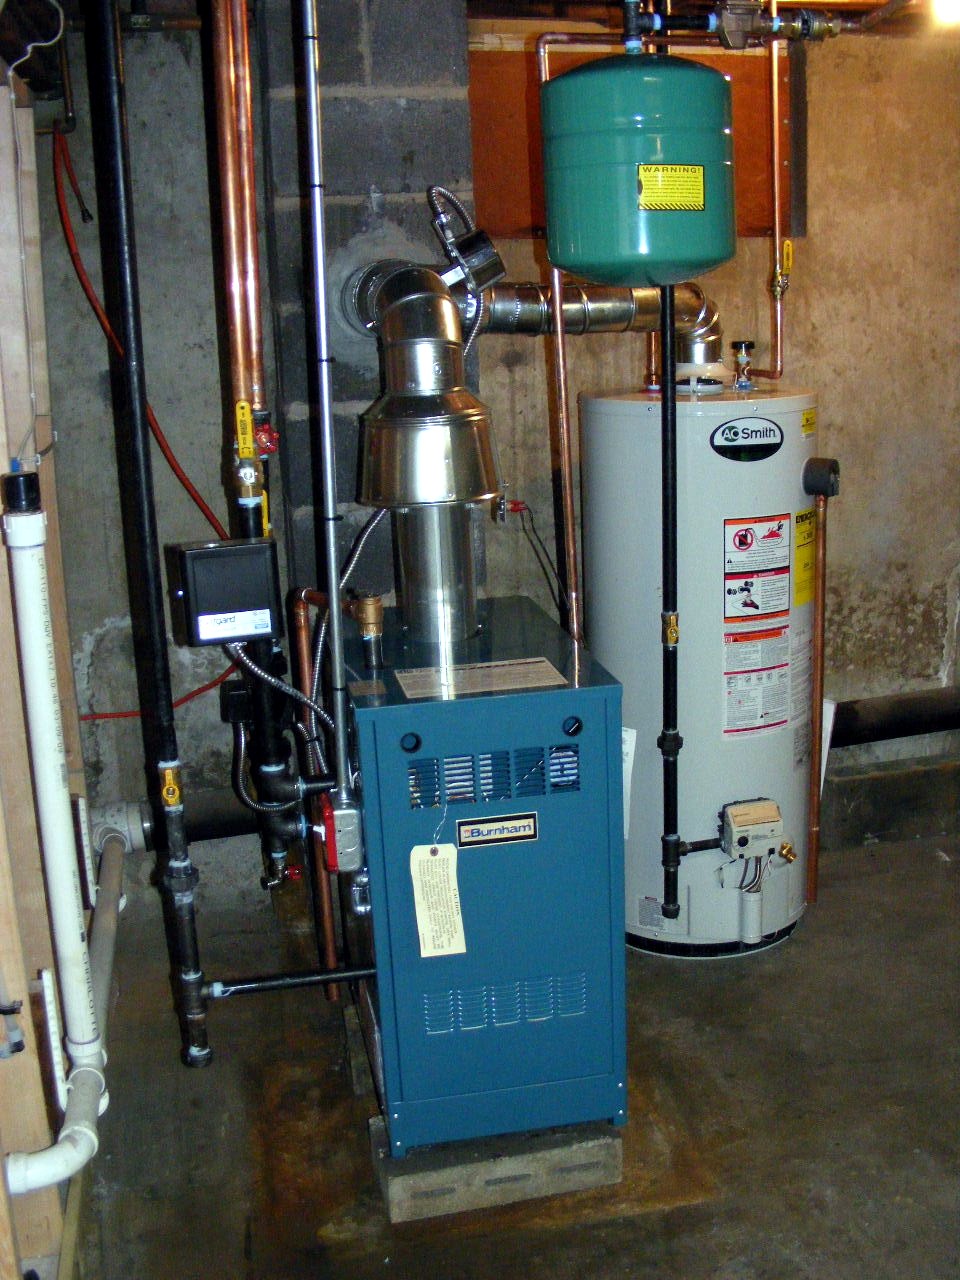 chip-s-news-from-newport-no-more-oil-heat-new-gas-boiler-and-water-heater